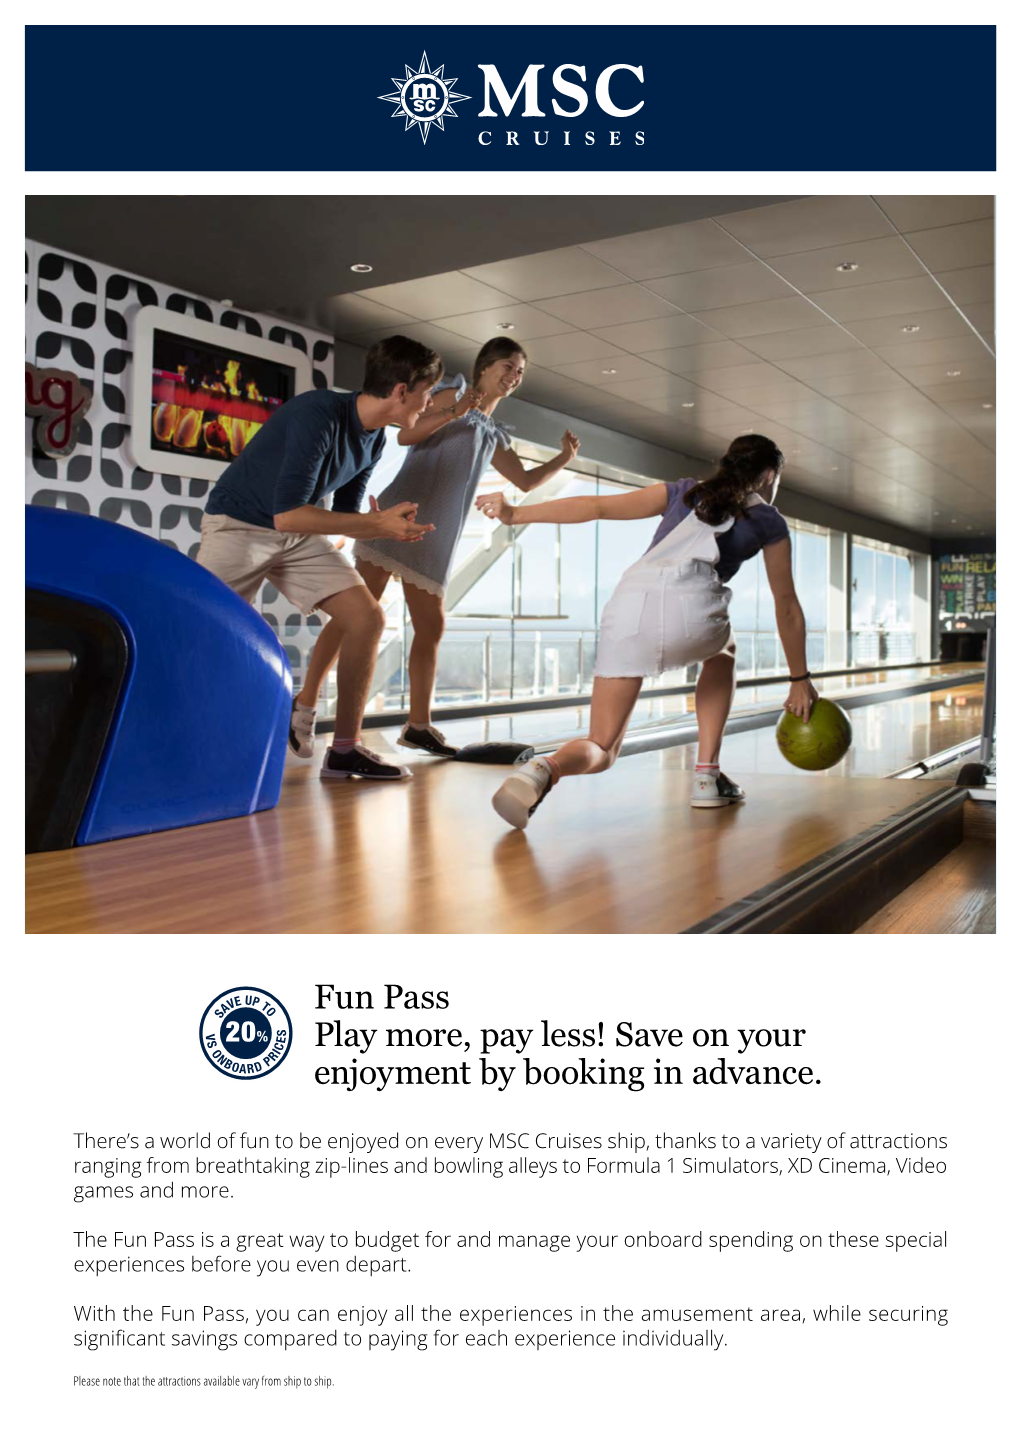 Fun Pass Play More, Pay Less! Save on Your Enjoyment by Booking In